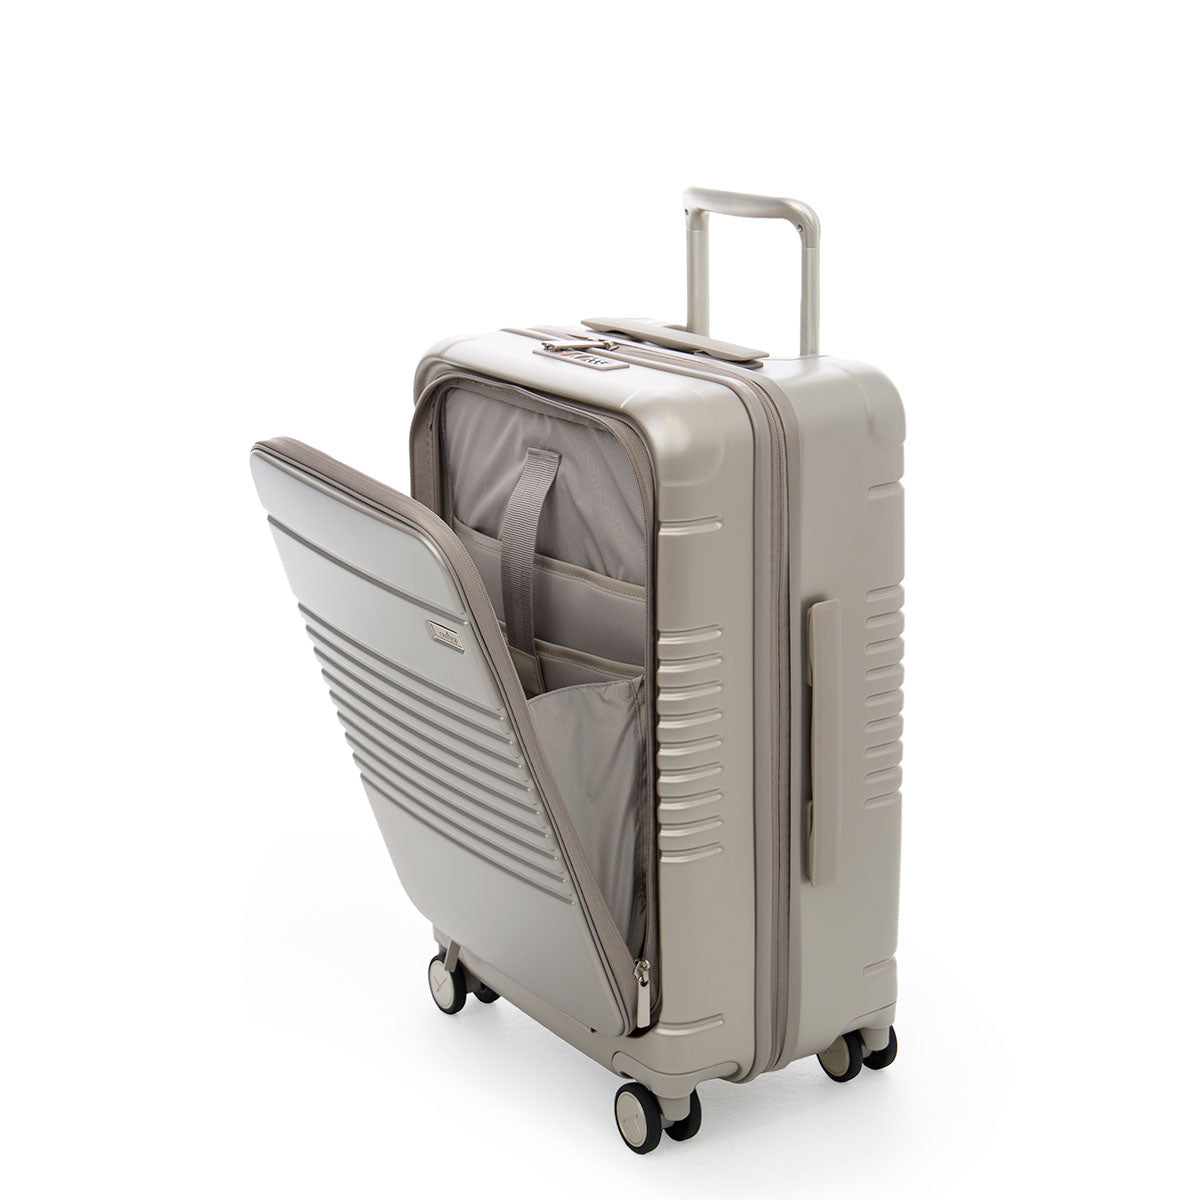 zipper carry-on max with front pocket in champagne color - side angle with pocket open